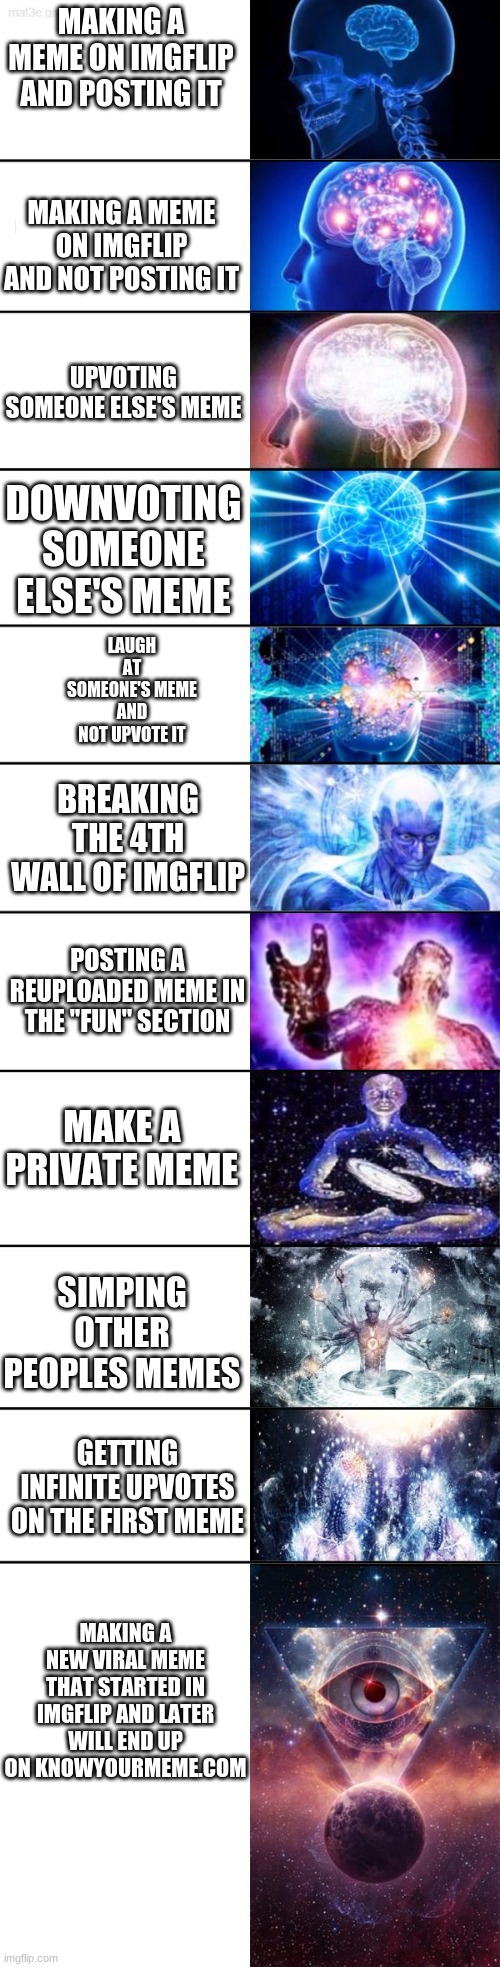 IMGFLIP Potrayed by expanding brain meme | MAKING A MEME ON IMGFLIP AND POSTING IT; MAKING A MEME ON IMGFLIP AND NOT POSTING IT; UPVOTING SOMEONE ELSE'S MEME; DOWNVOTING SOMEONE ELSE'S MEME; LAUGH AT SOMEONE'S MEME AND NOT UPVOTE IT; BREAKING THE 4TH WALL OF IMGFLIP; POSTING A REUPLOADED MEME IN THE "FUN" SECTION; MAKE A PRIVATE MEME; SIMPING OTHER PEOPLES MEMES; GETTING INFINITE UPVOTES ON THE FIRST MEME; MAKING A NEW VIRAL MEME THAT STARTED IN IMGFLIP AND LATER WILL END UP ON KNOWYOURMEME.COM | image tagged in extended expanding brain | made w/ Imgflip meme maker